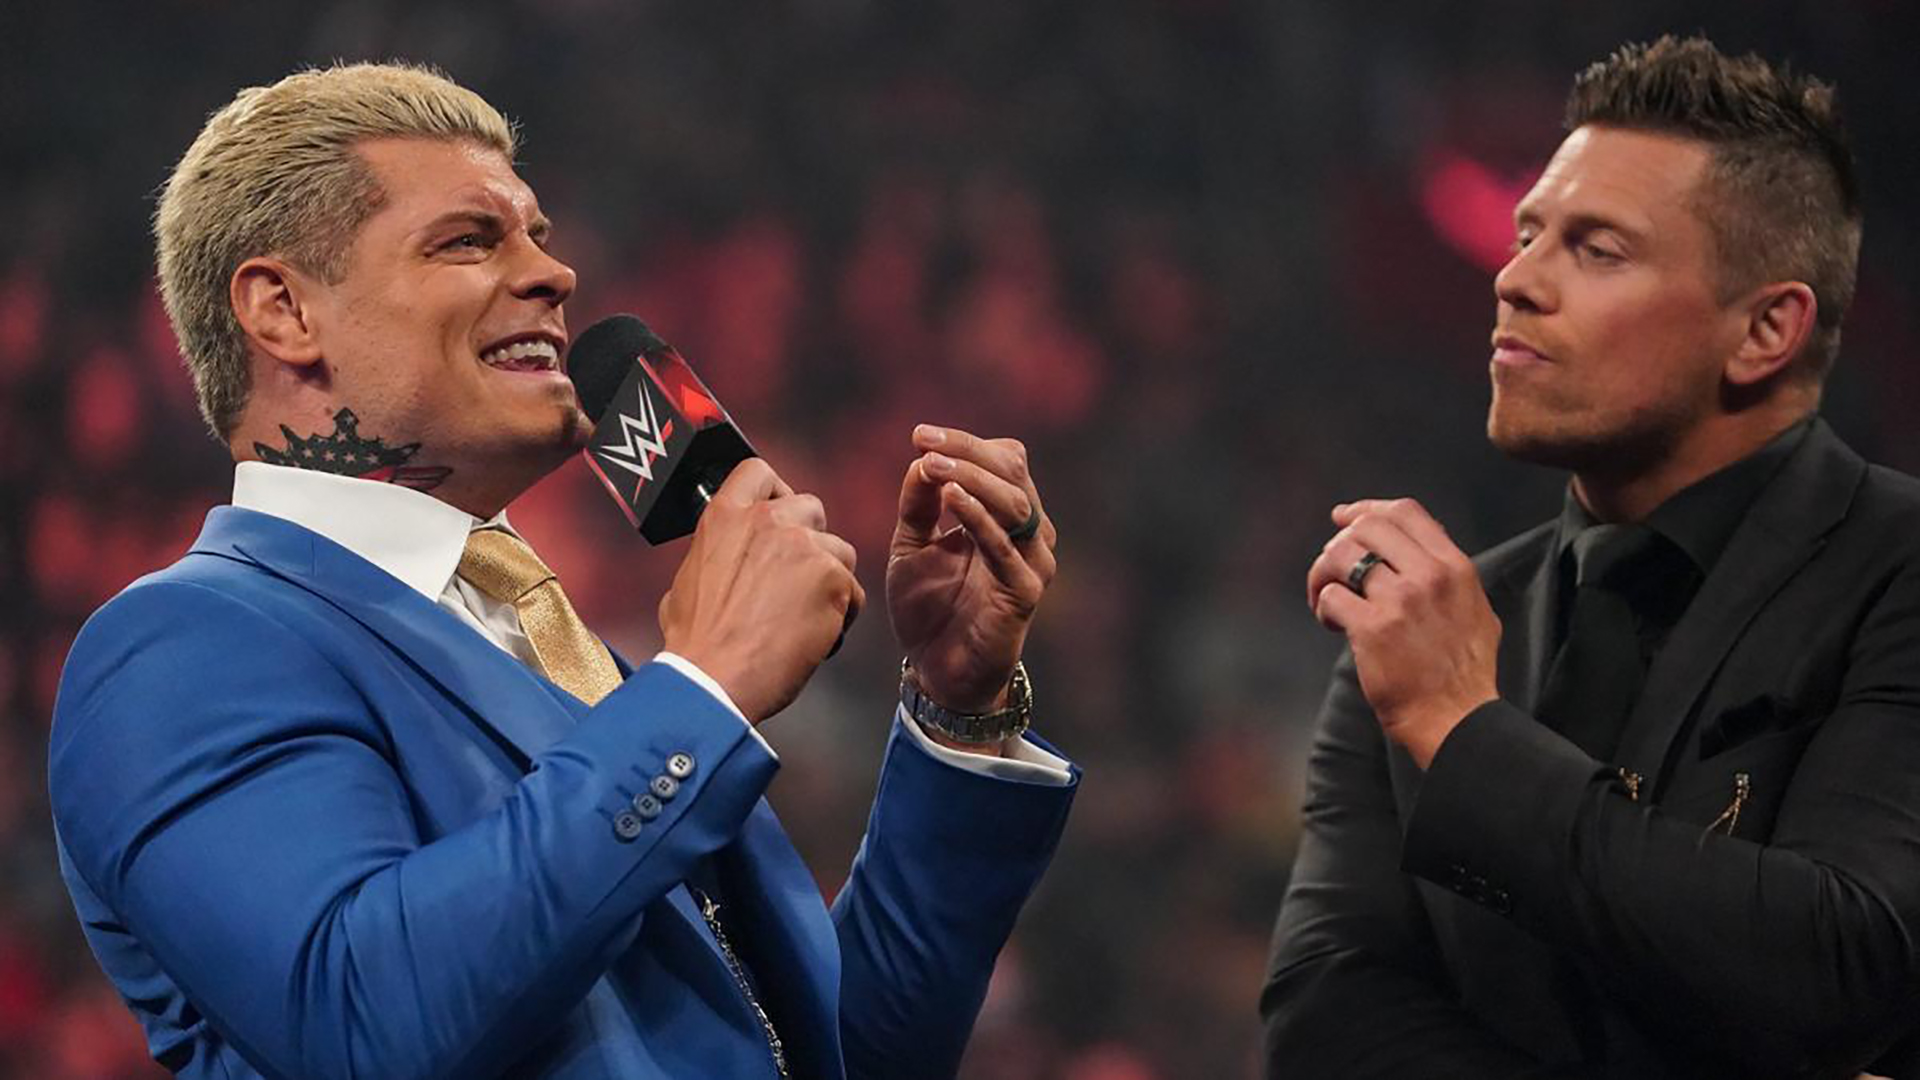 Cody Rhodes Uses Banned Words On WWE RAW